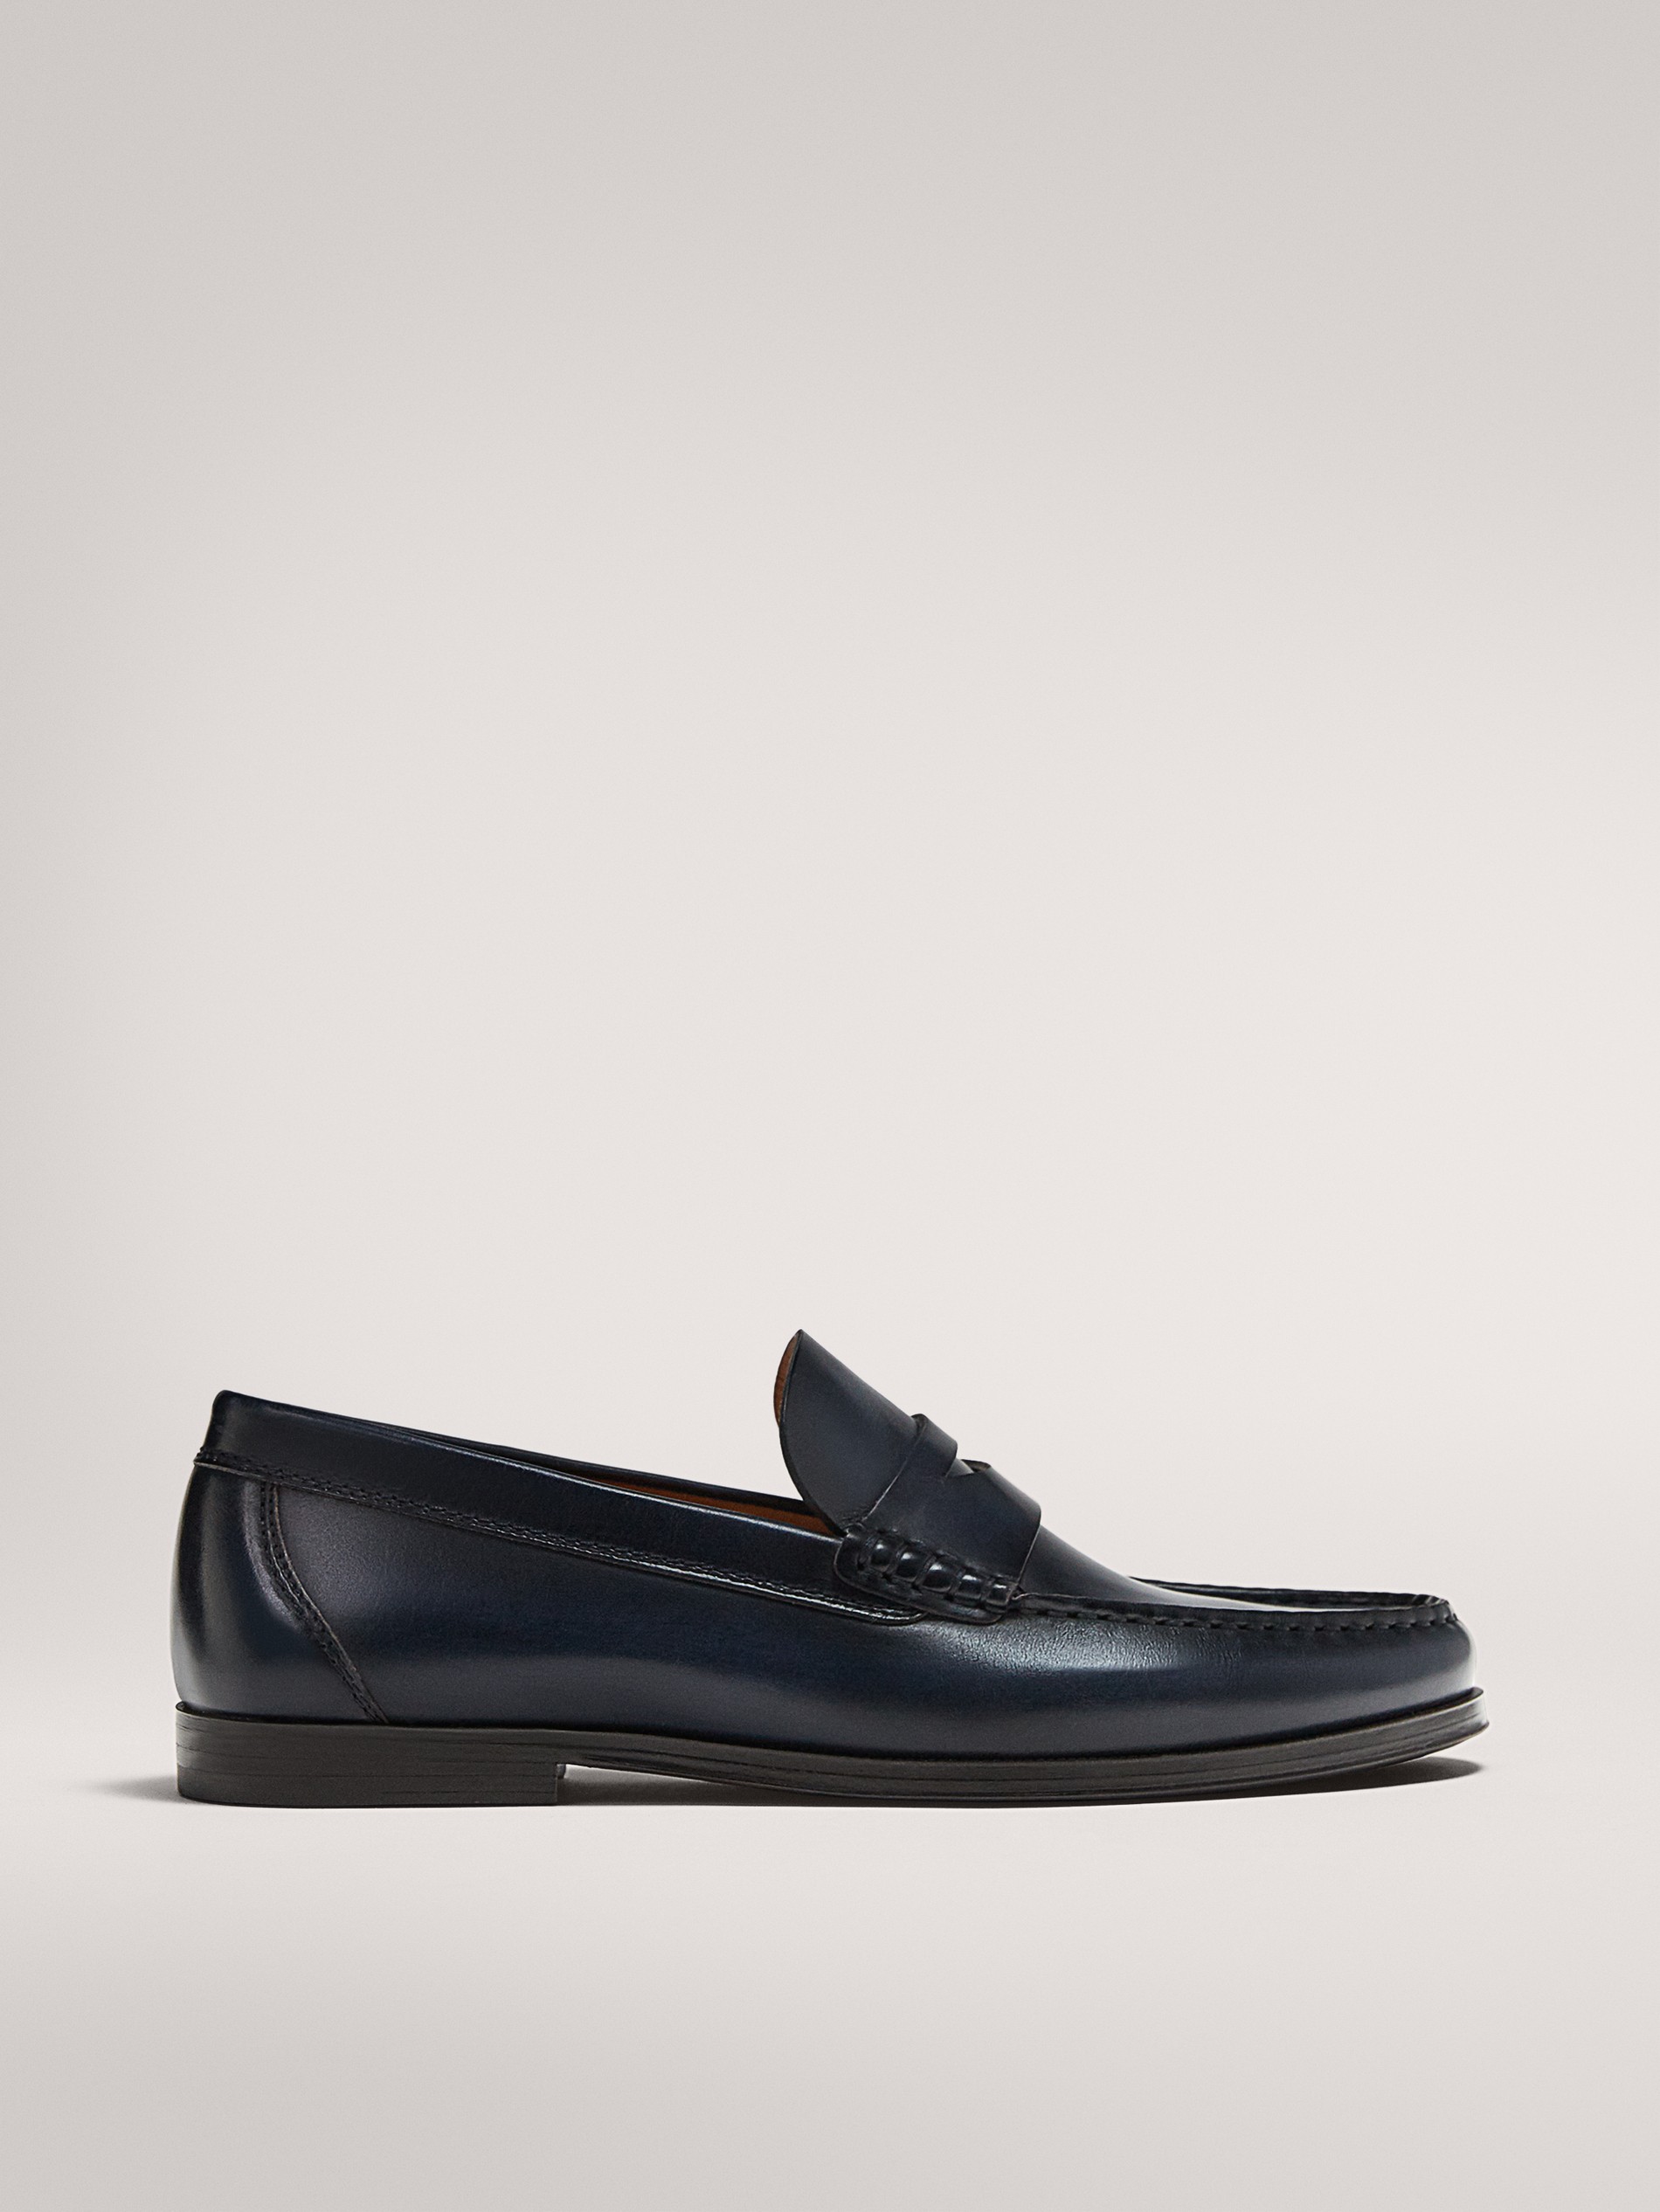 women's black leather penny loafers